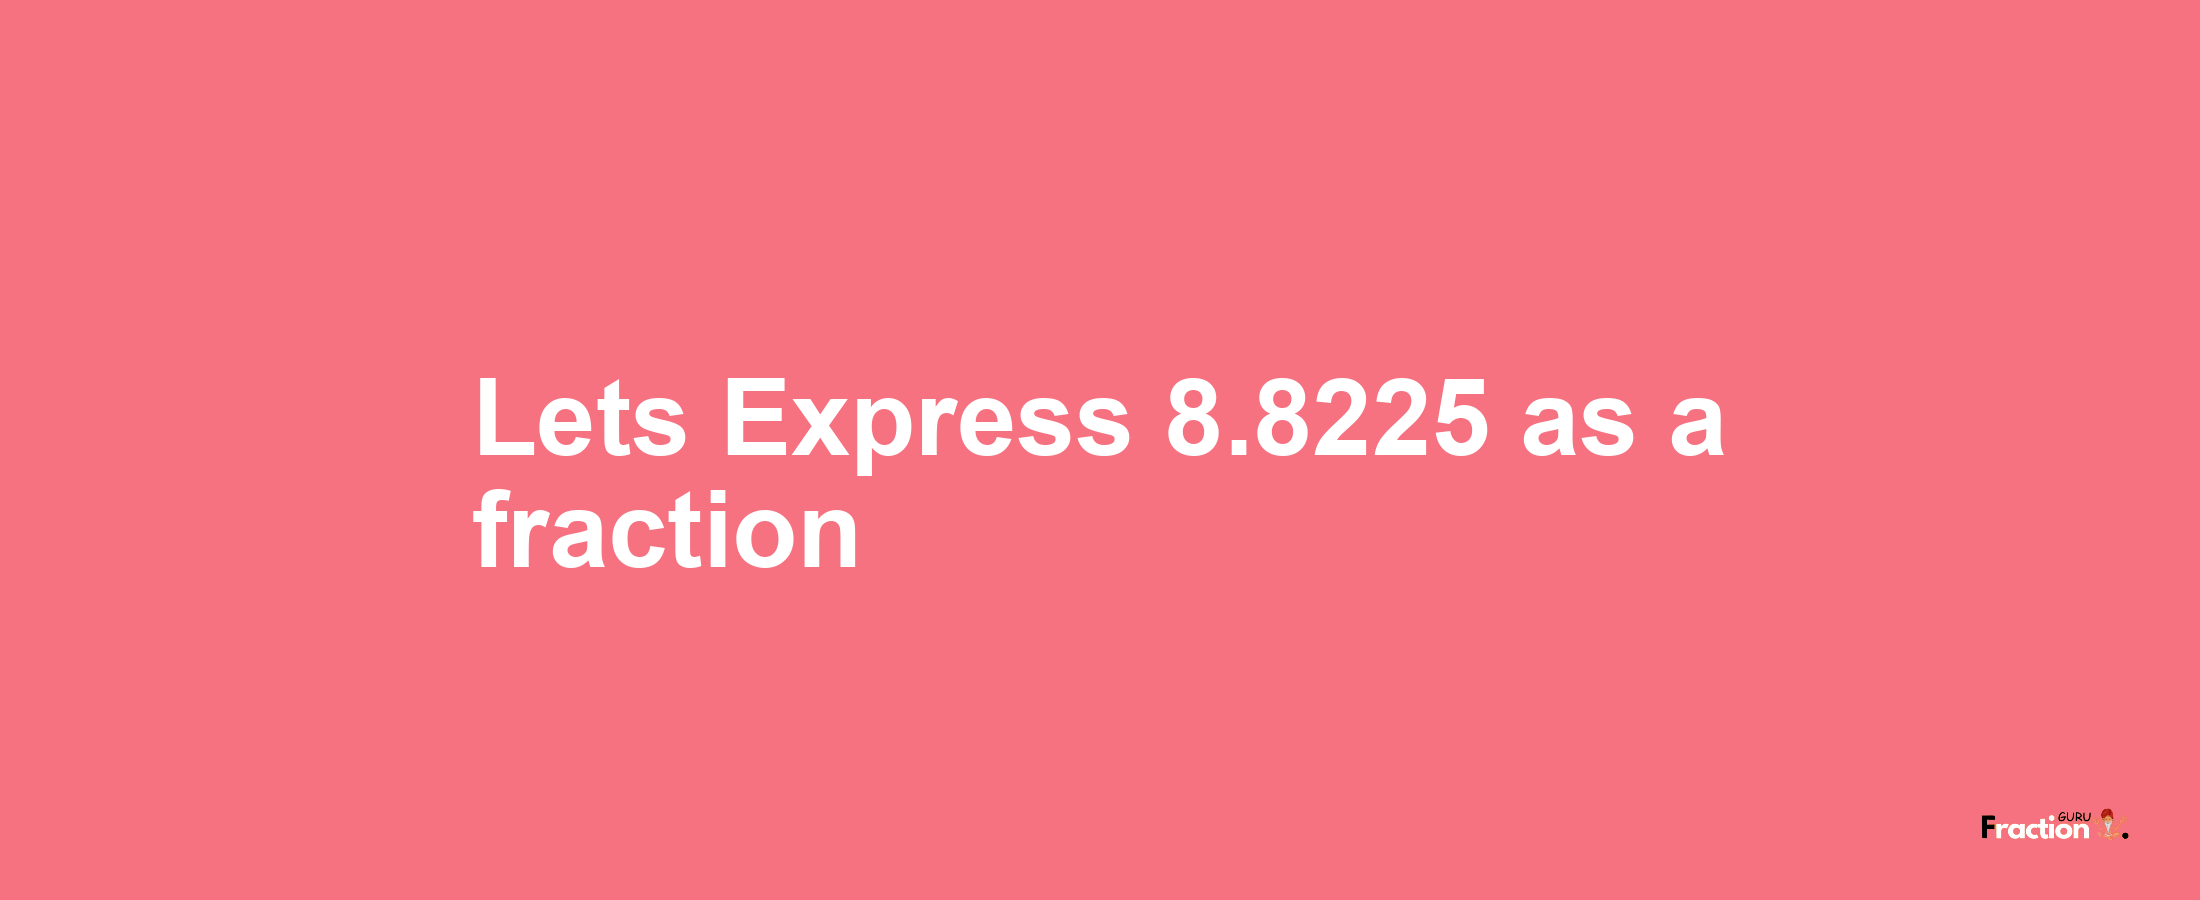 Lets Express 8.8225 as afraction